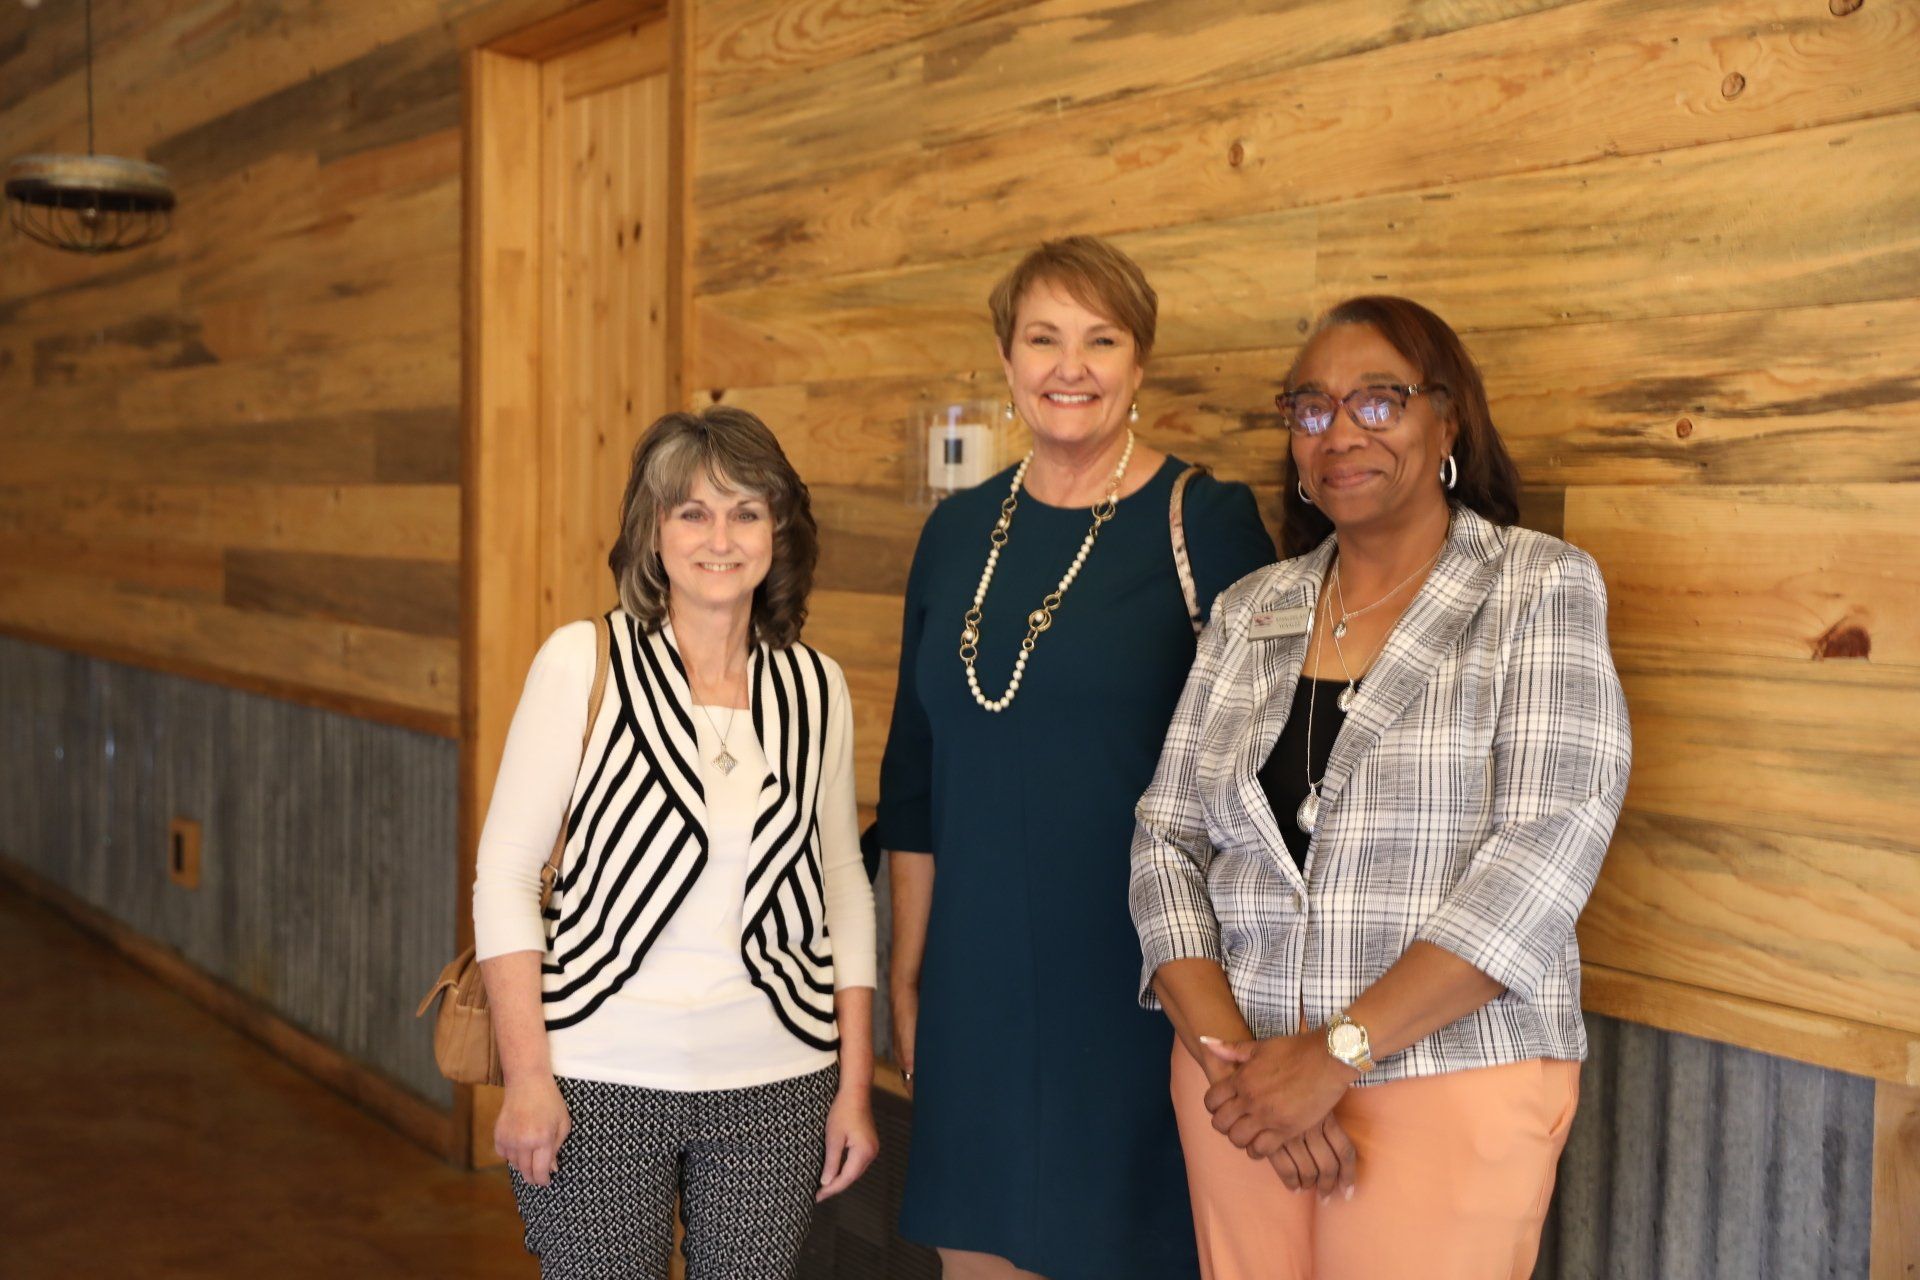 Three women are standing next to each other in front of a wooden wall.